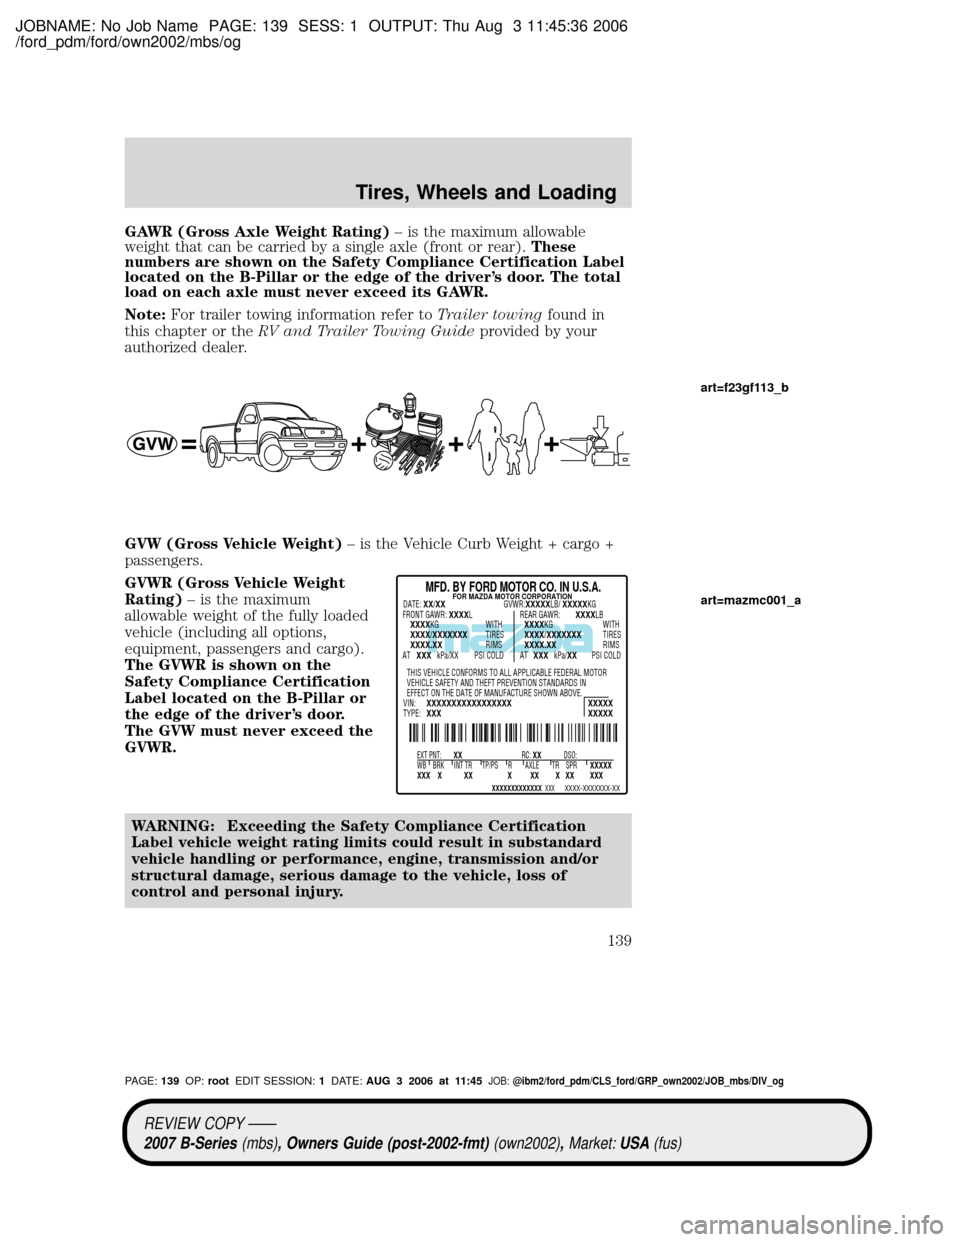 MAZDA MODEL B4000 TRUCK 2007  Owners Manual (in English) JOBNAME: No Job Name PAGE: 139 SESS: 1 OUTPUT: Thu Aug 3 11:45:36 2006
/ford_pdm/ford/own2002/mbs/og
GAWR (Gross Axle Weight Rating)± is the maximum allowable
weight that can be carried by a single a